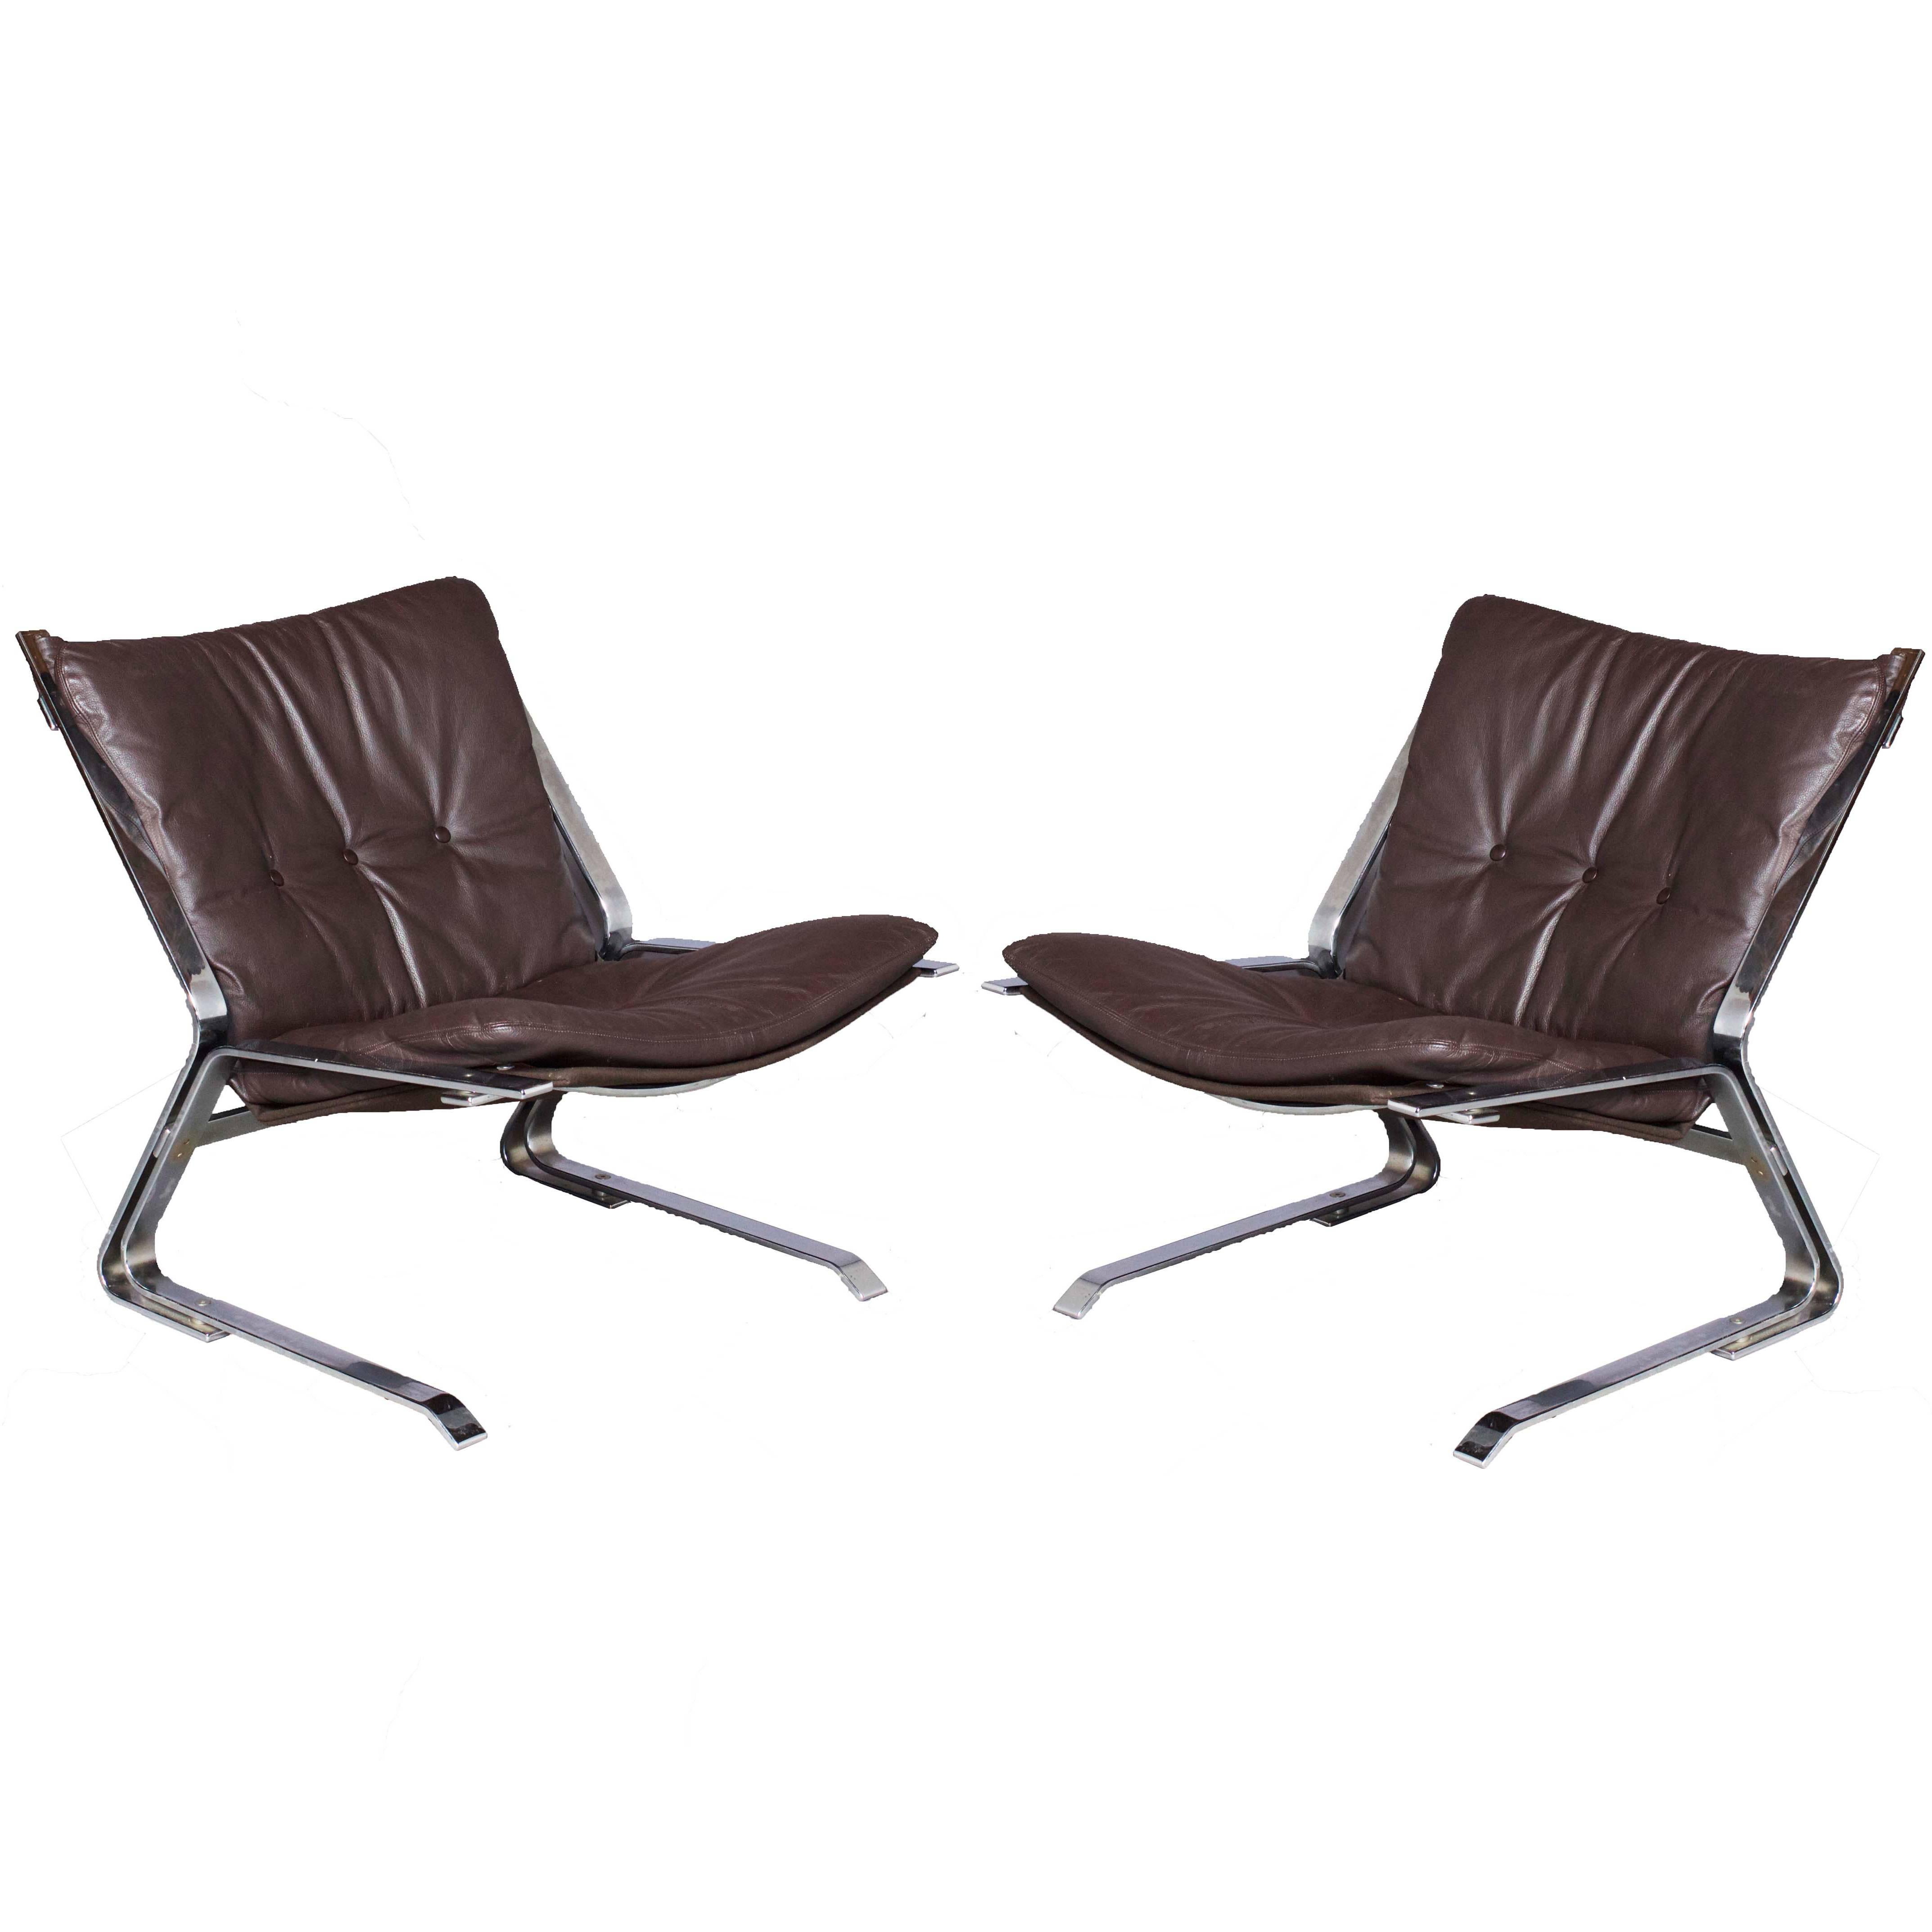 Pair of Elsa and Nordahl Solheim Chrome Pirate Chairs For Sale